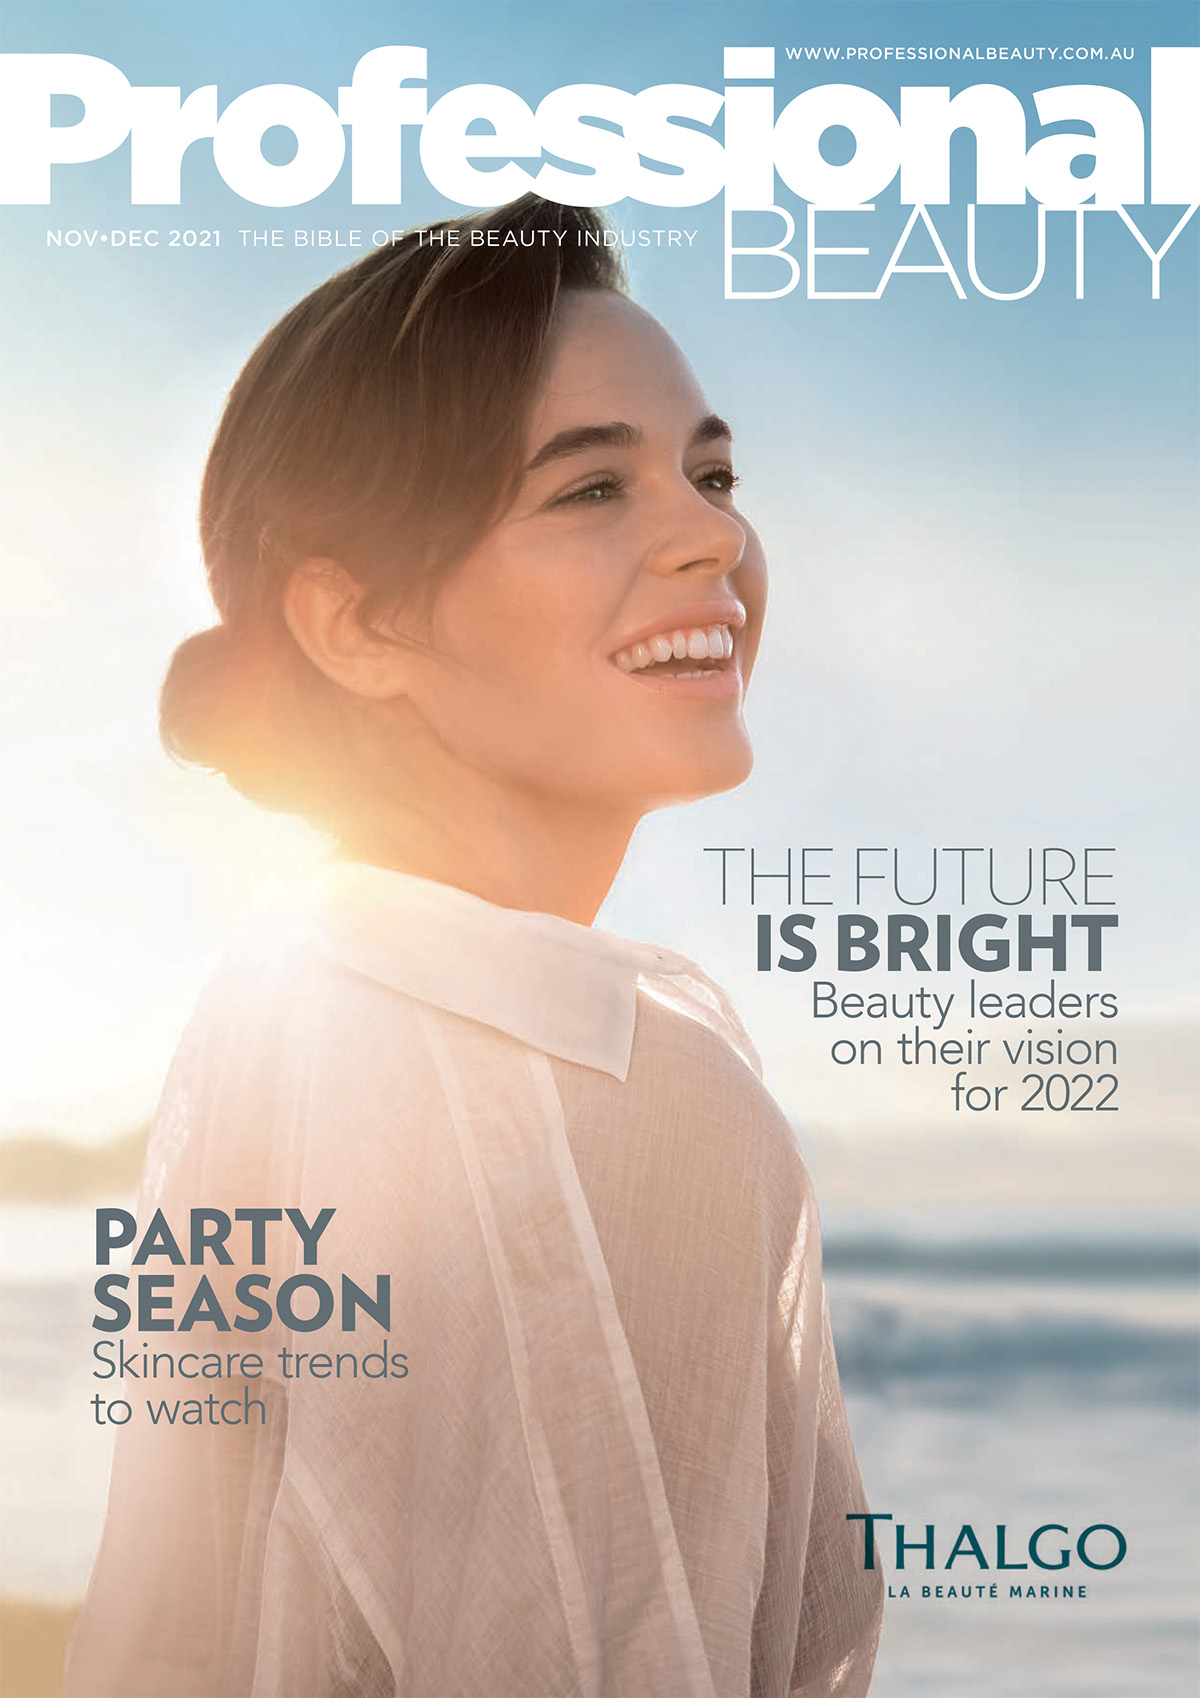 Professional Beauty November/December 2021 issue